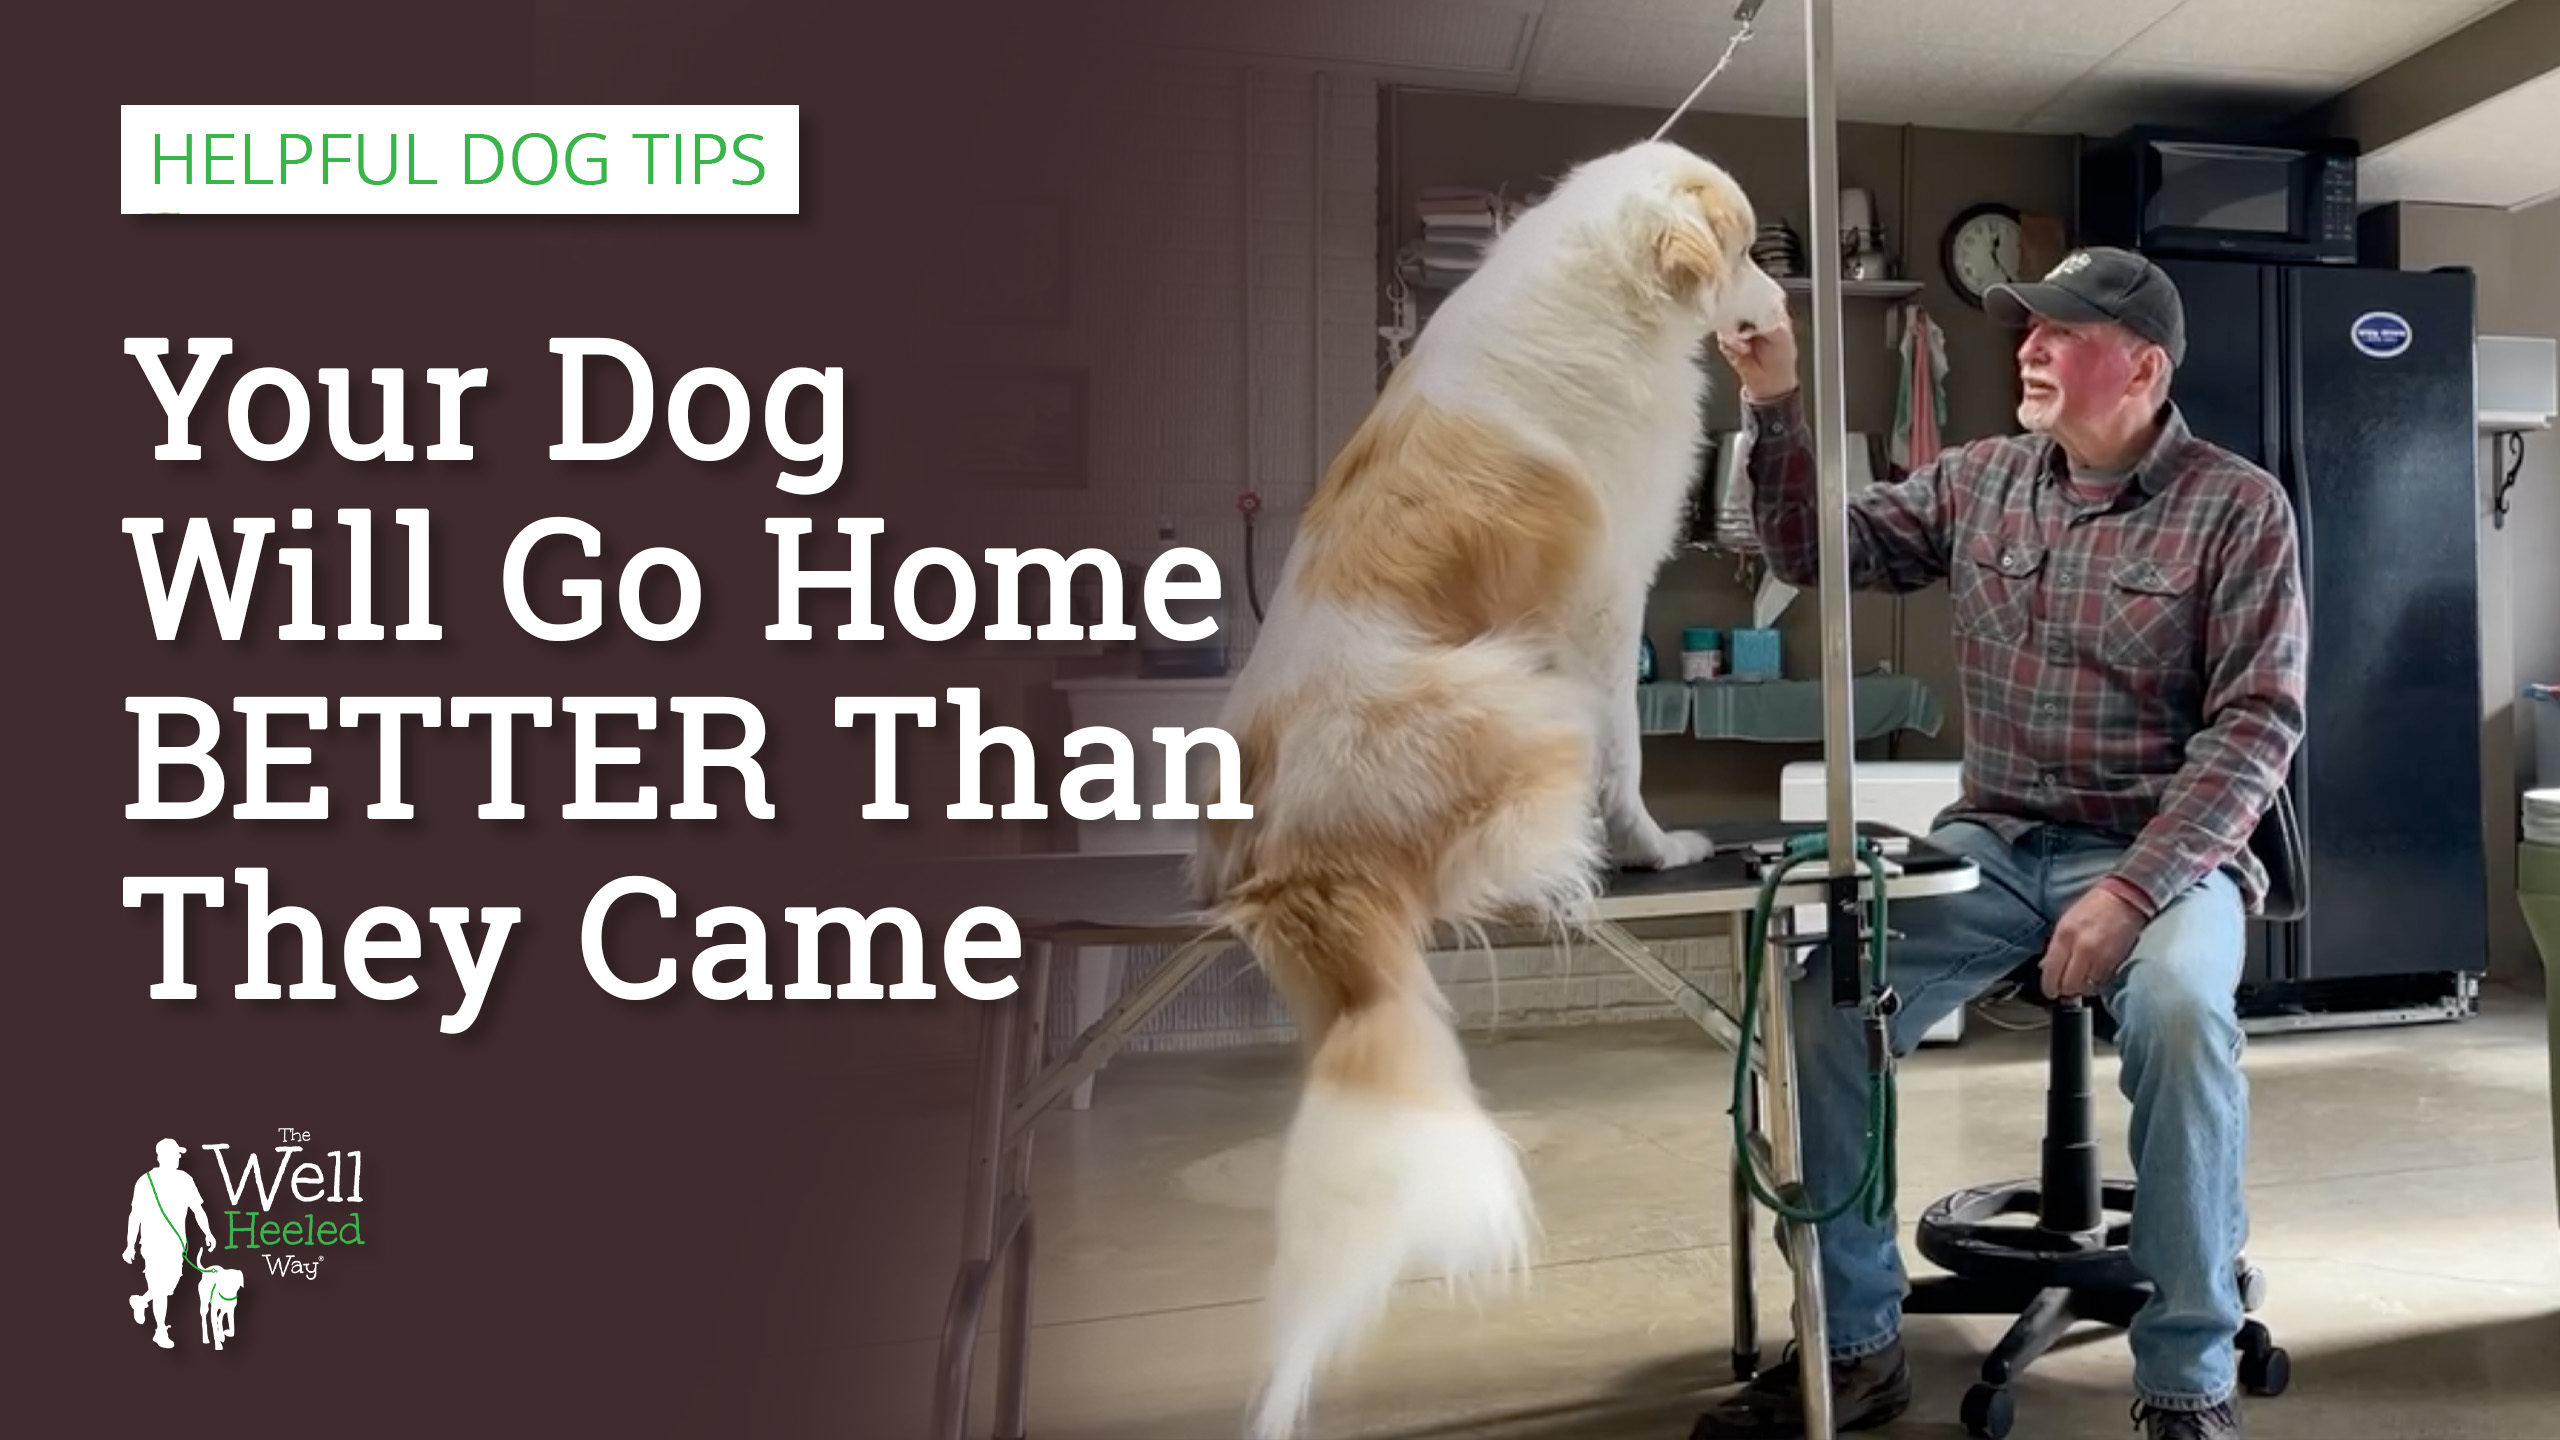 Your Dog Will Go Home BETTER Than They Came